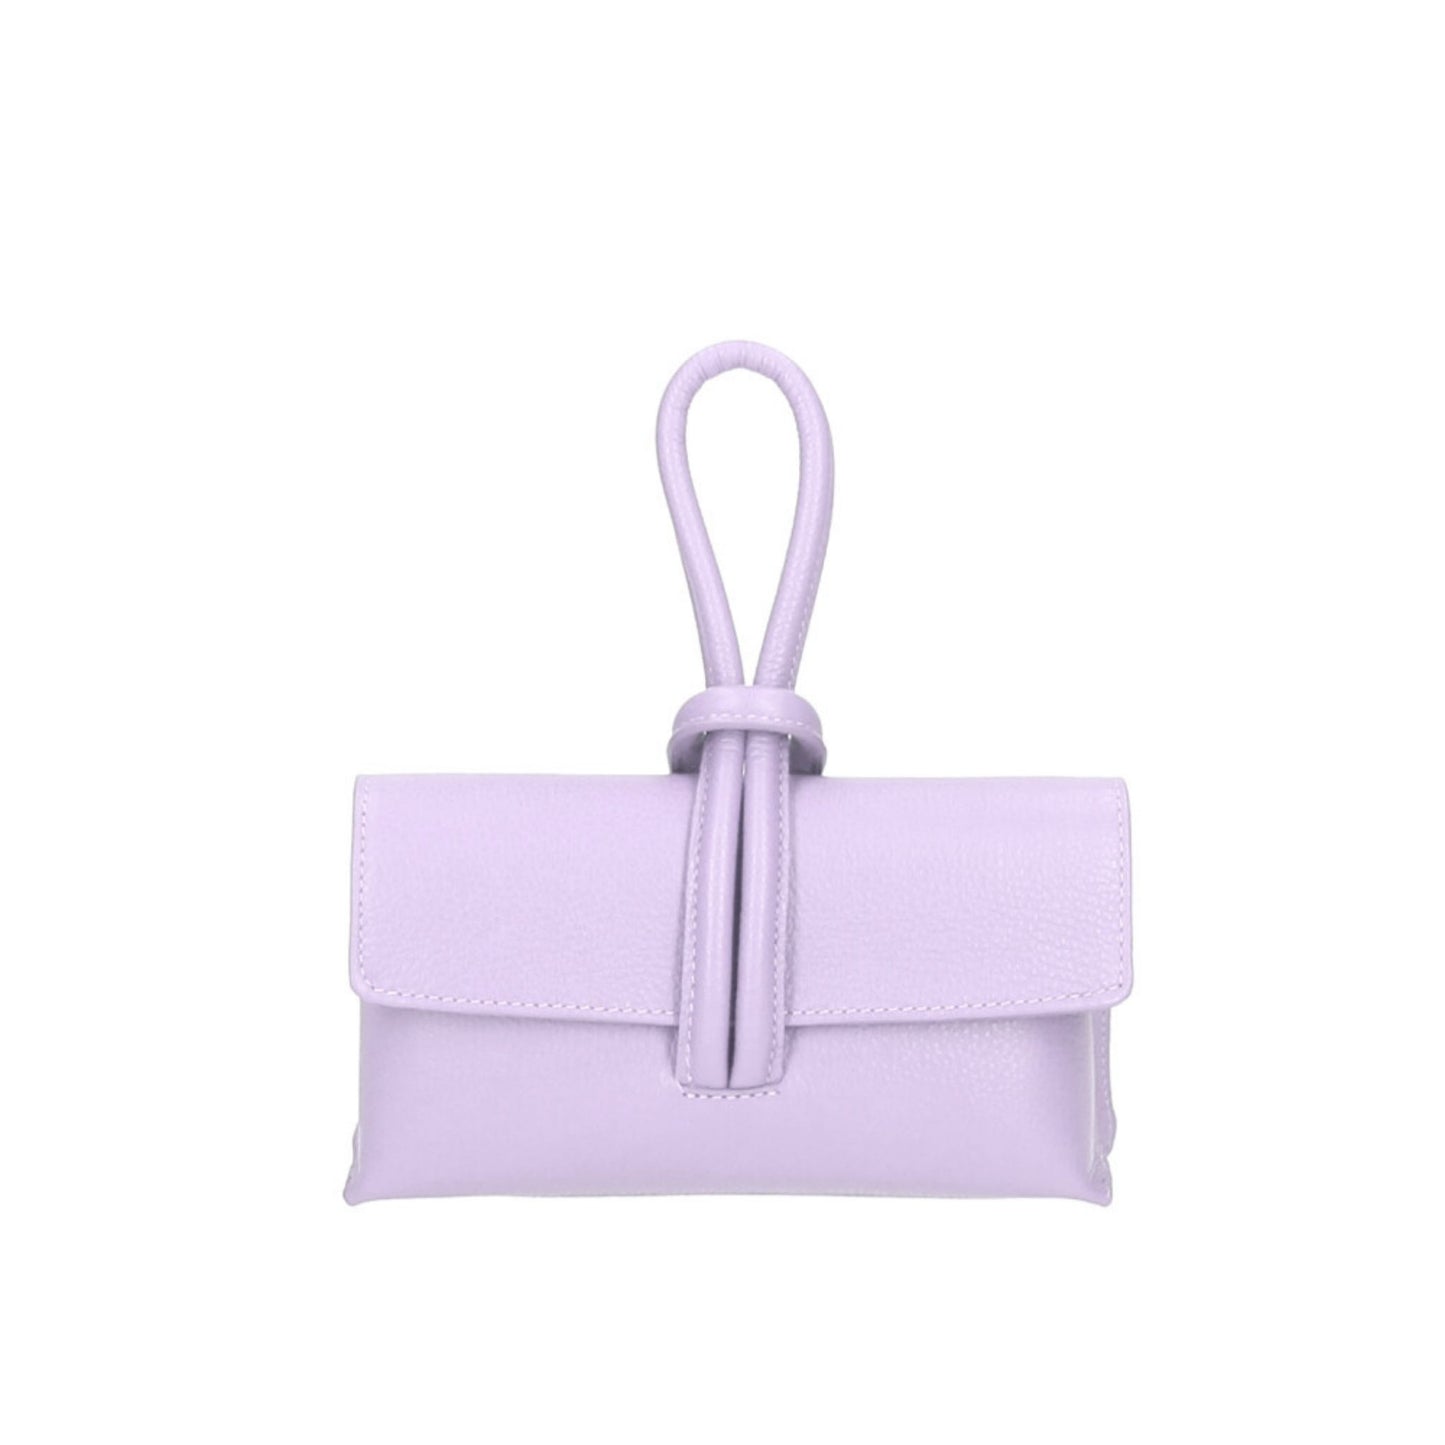 The Leather Top Handle Bag